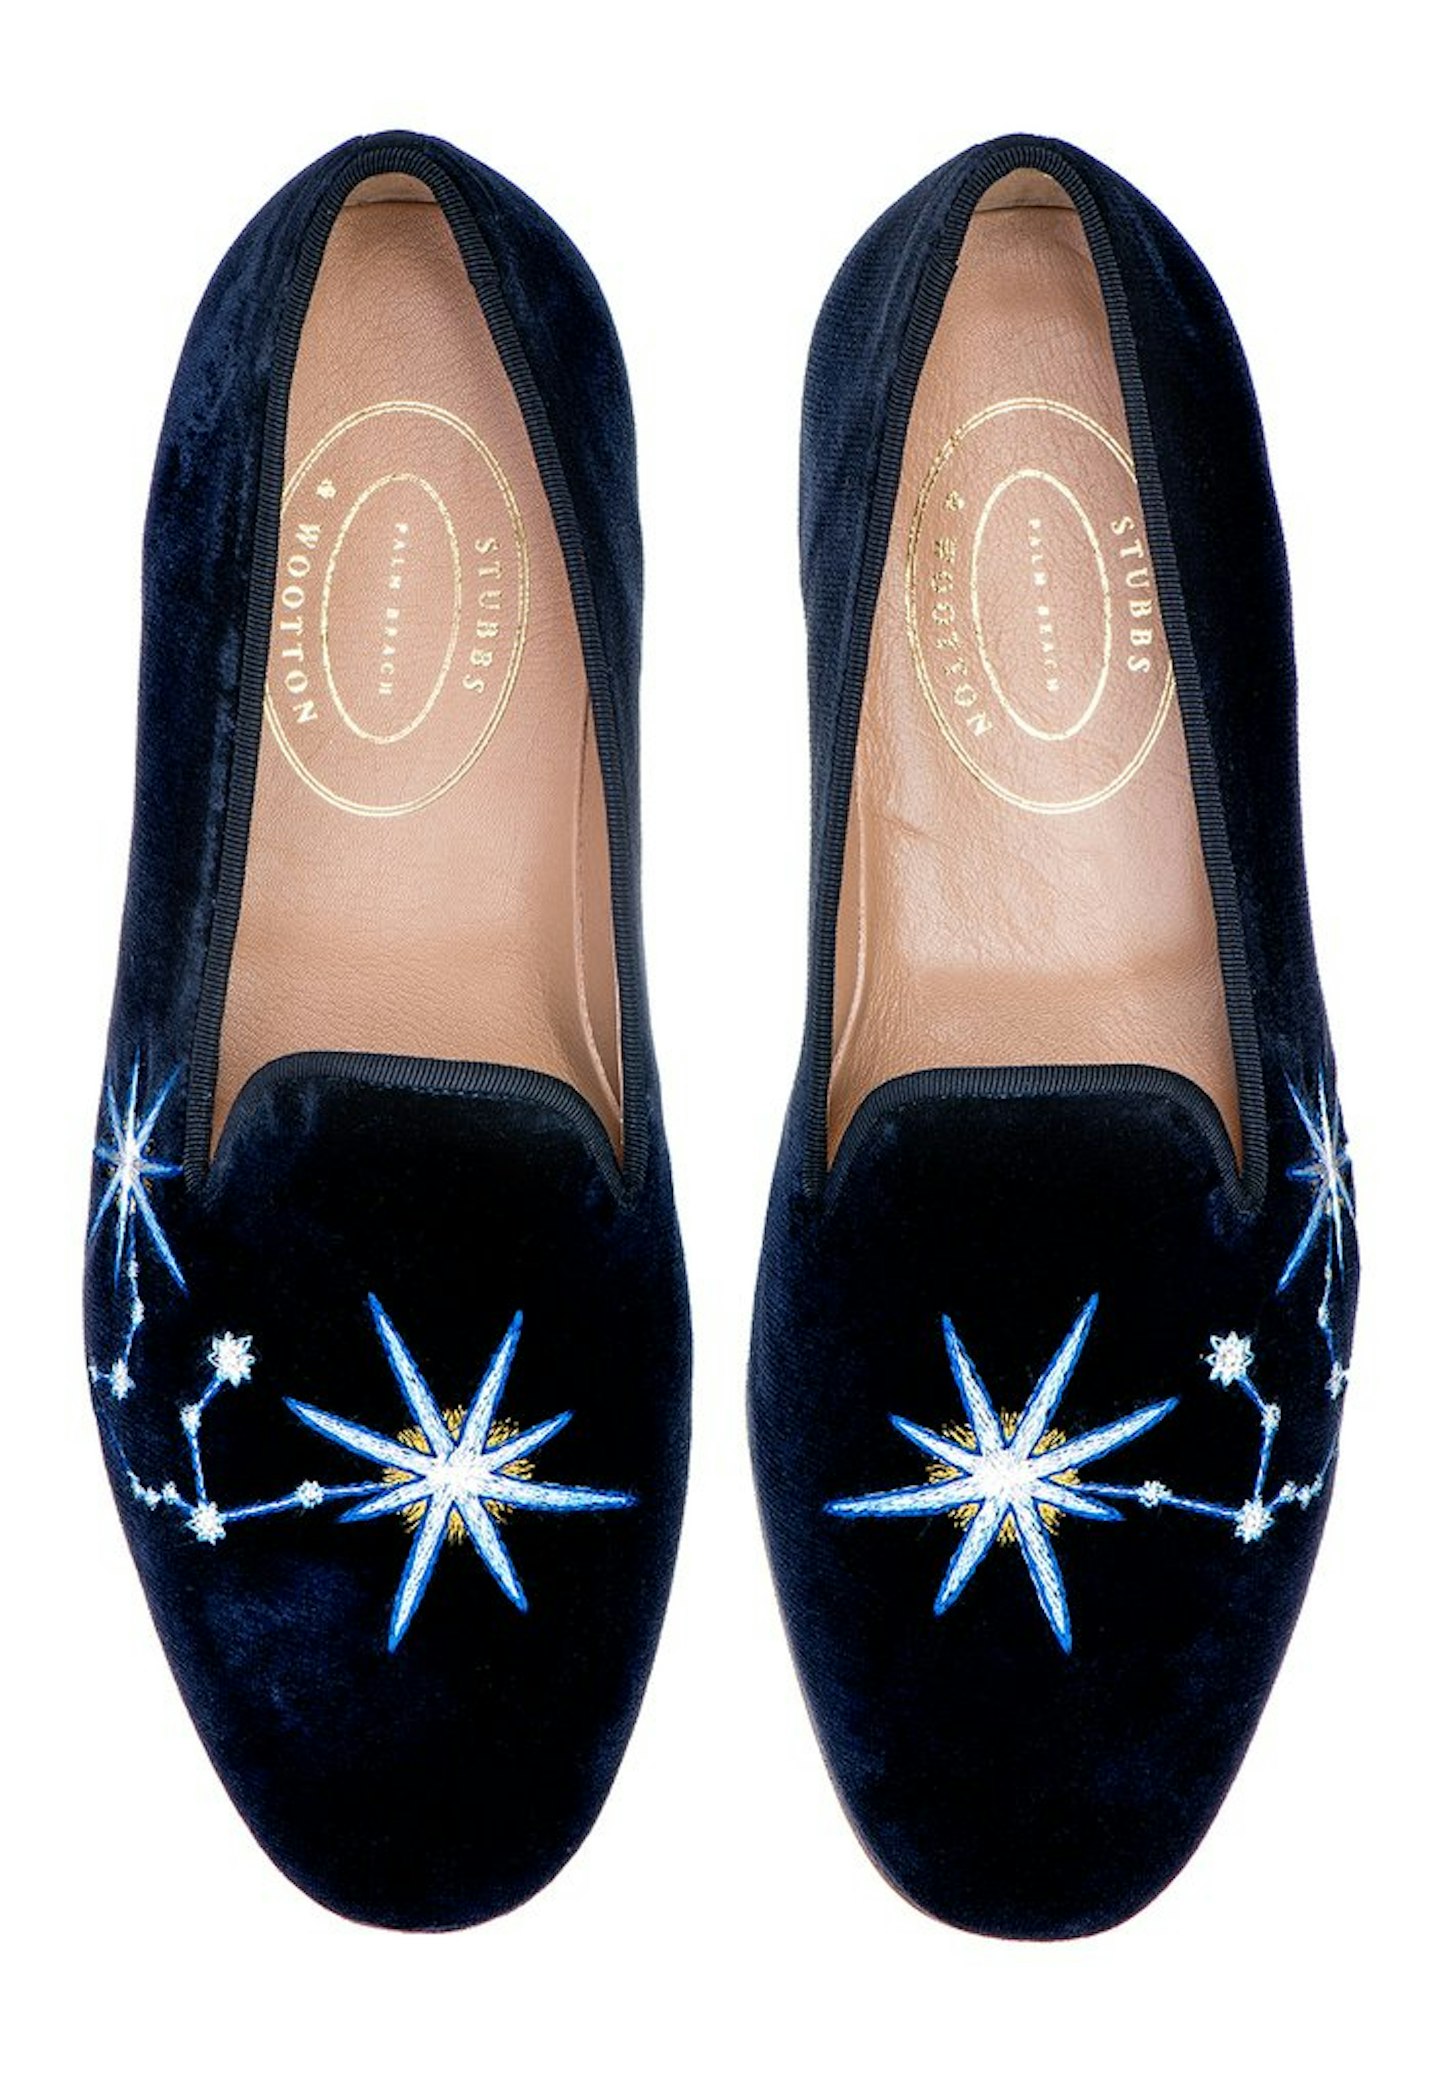 Stubbs & Wootton, Astrological Slippers, £373